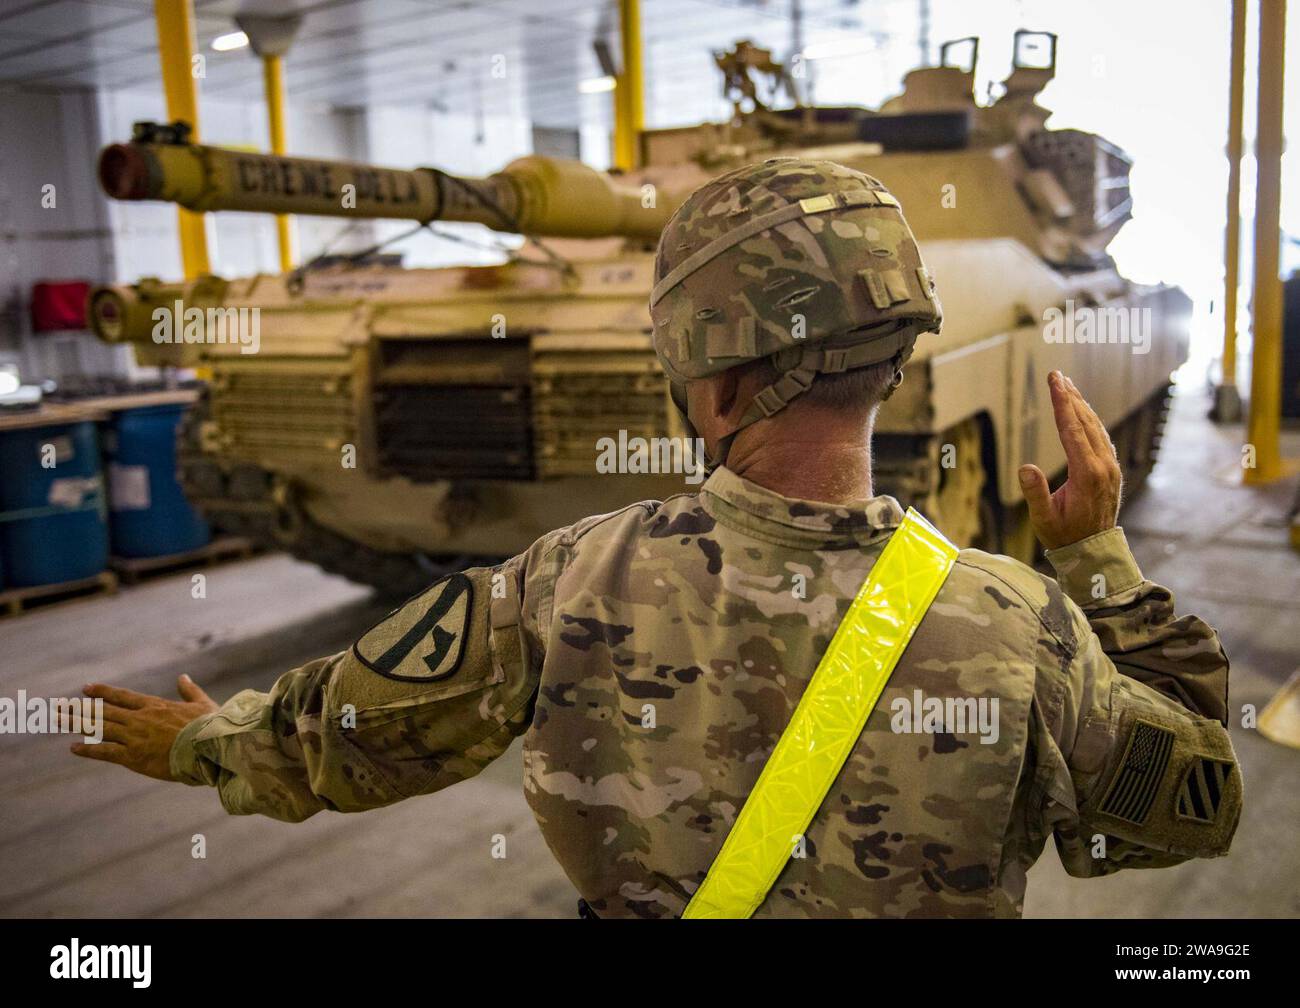 US military forces. POTI, Georgia (Aug. 22, 2018) A U.S. Army Soldier assigned to Bravo Company, 2nd Battalion, 5th Cavalry Regiment, 1st Armored Brigade Combat Team, 1st Cavalry Division, directs an M88 HERCULES Recovery Vehicle aboard the Spearhead-class expeditionary fast transport ship USNS Carson City (T-EPF 7) in Poti, Georgia, Aug. 22, 2018. Carson City is the seventh of nine expeditionary fast transport ships in Military Sealift Command's inventory with a primary mission of providing rapid transport of military equipment and personnel in theater via its 20,000 square foot reconfigurabl Stock Photo